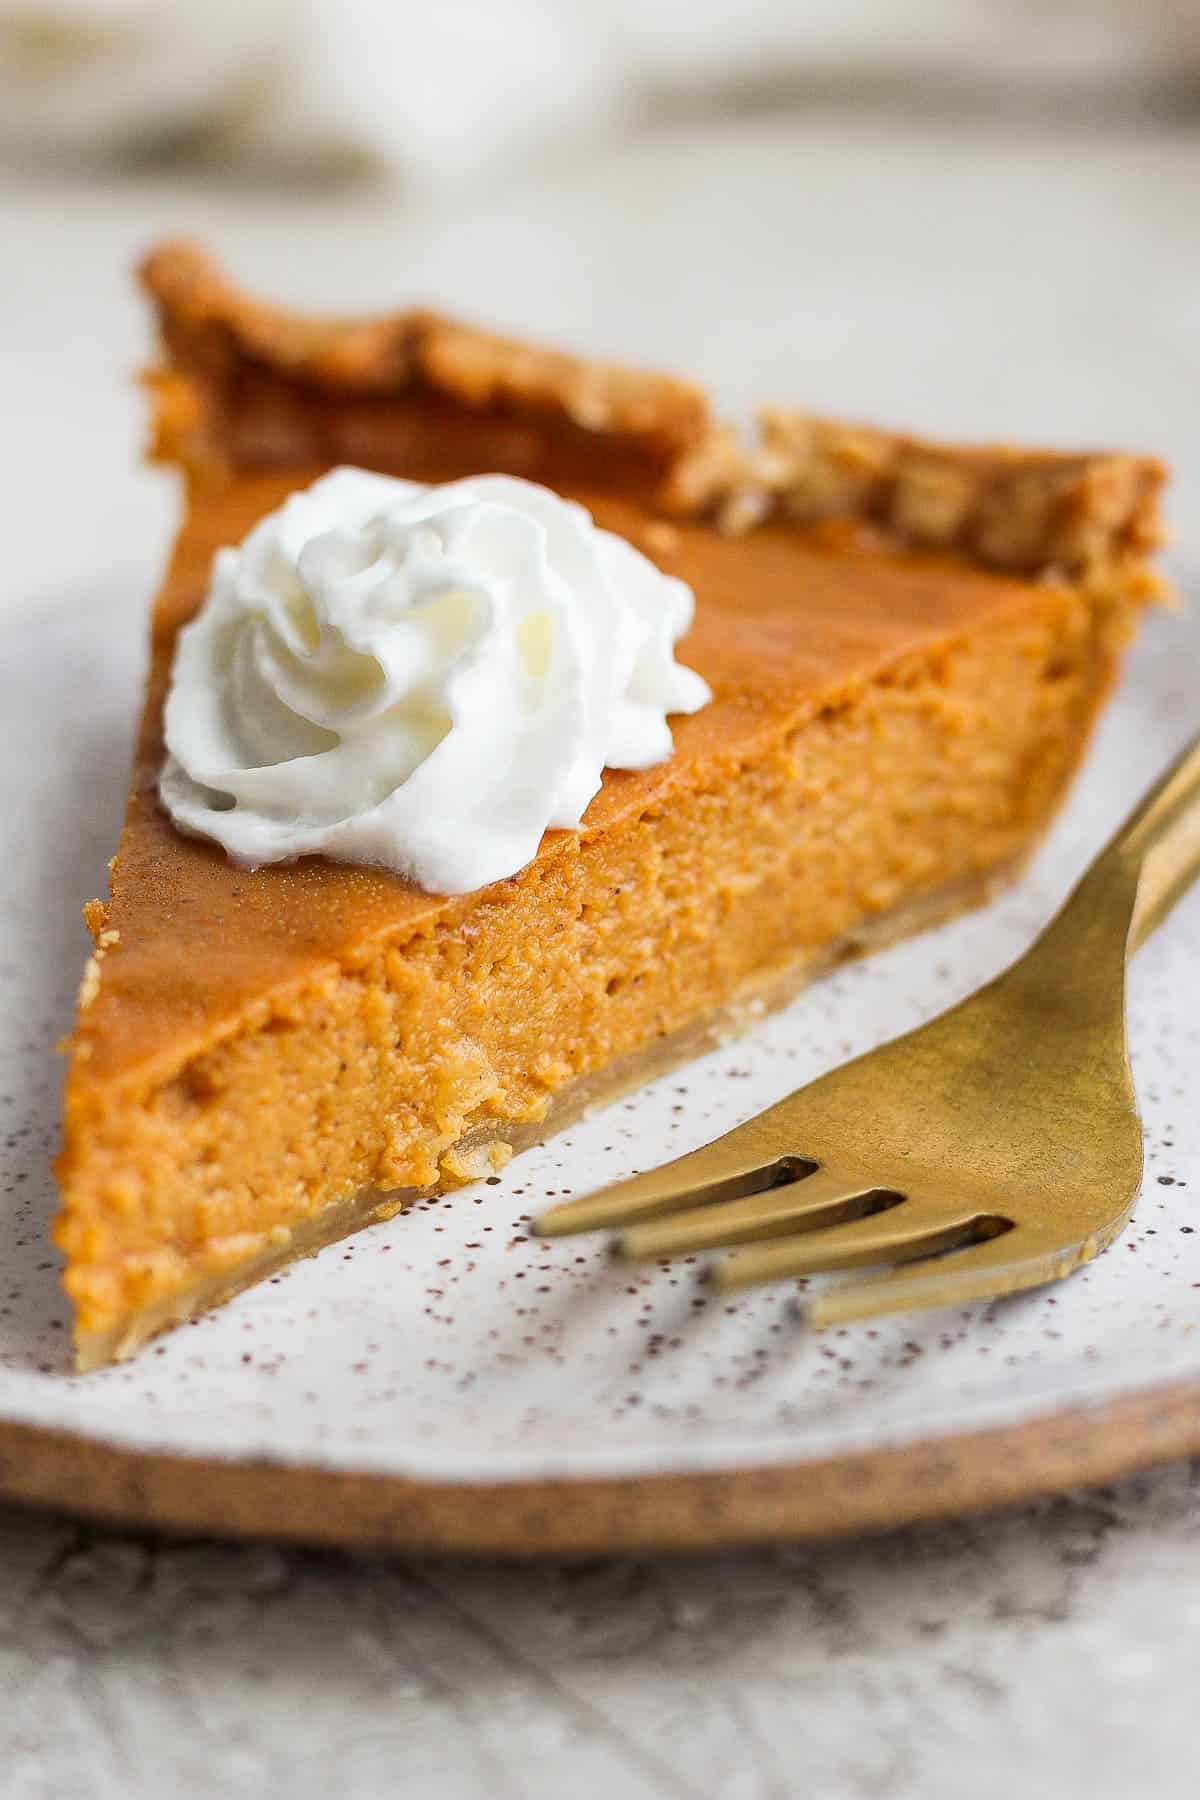 A close up of a piece of pumpkin pie with a dollop of whip cream on a plate alongside a golden fork.